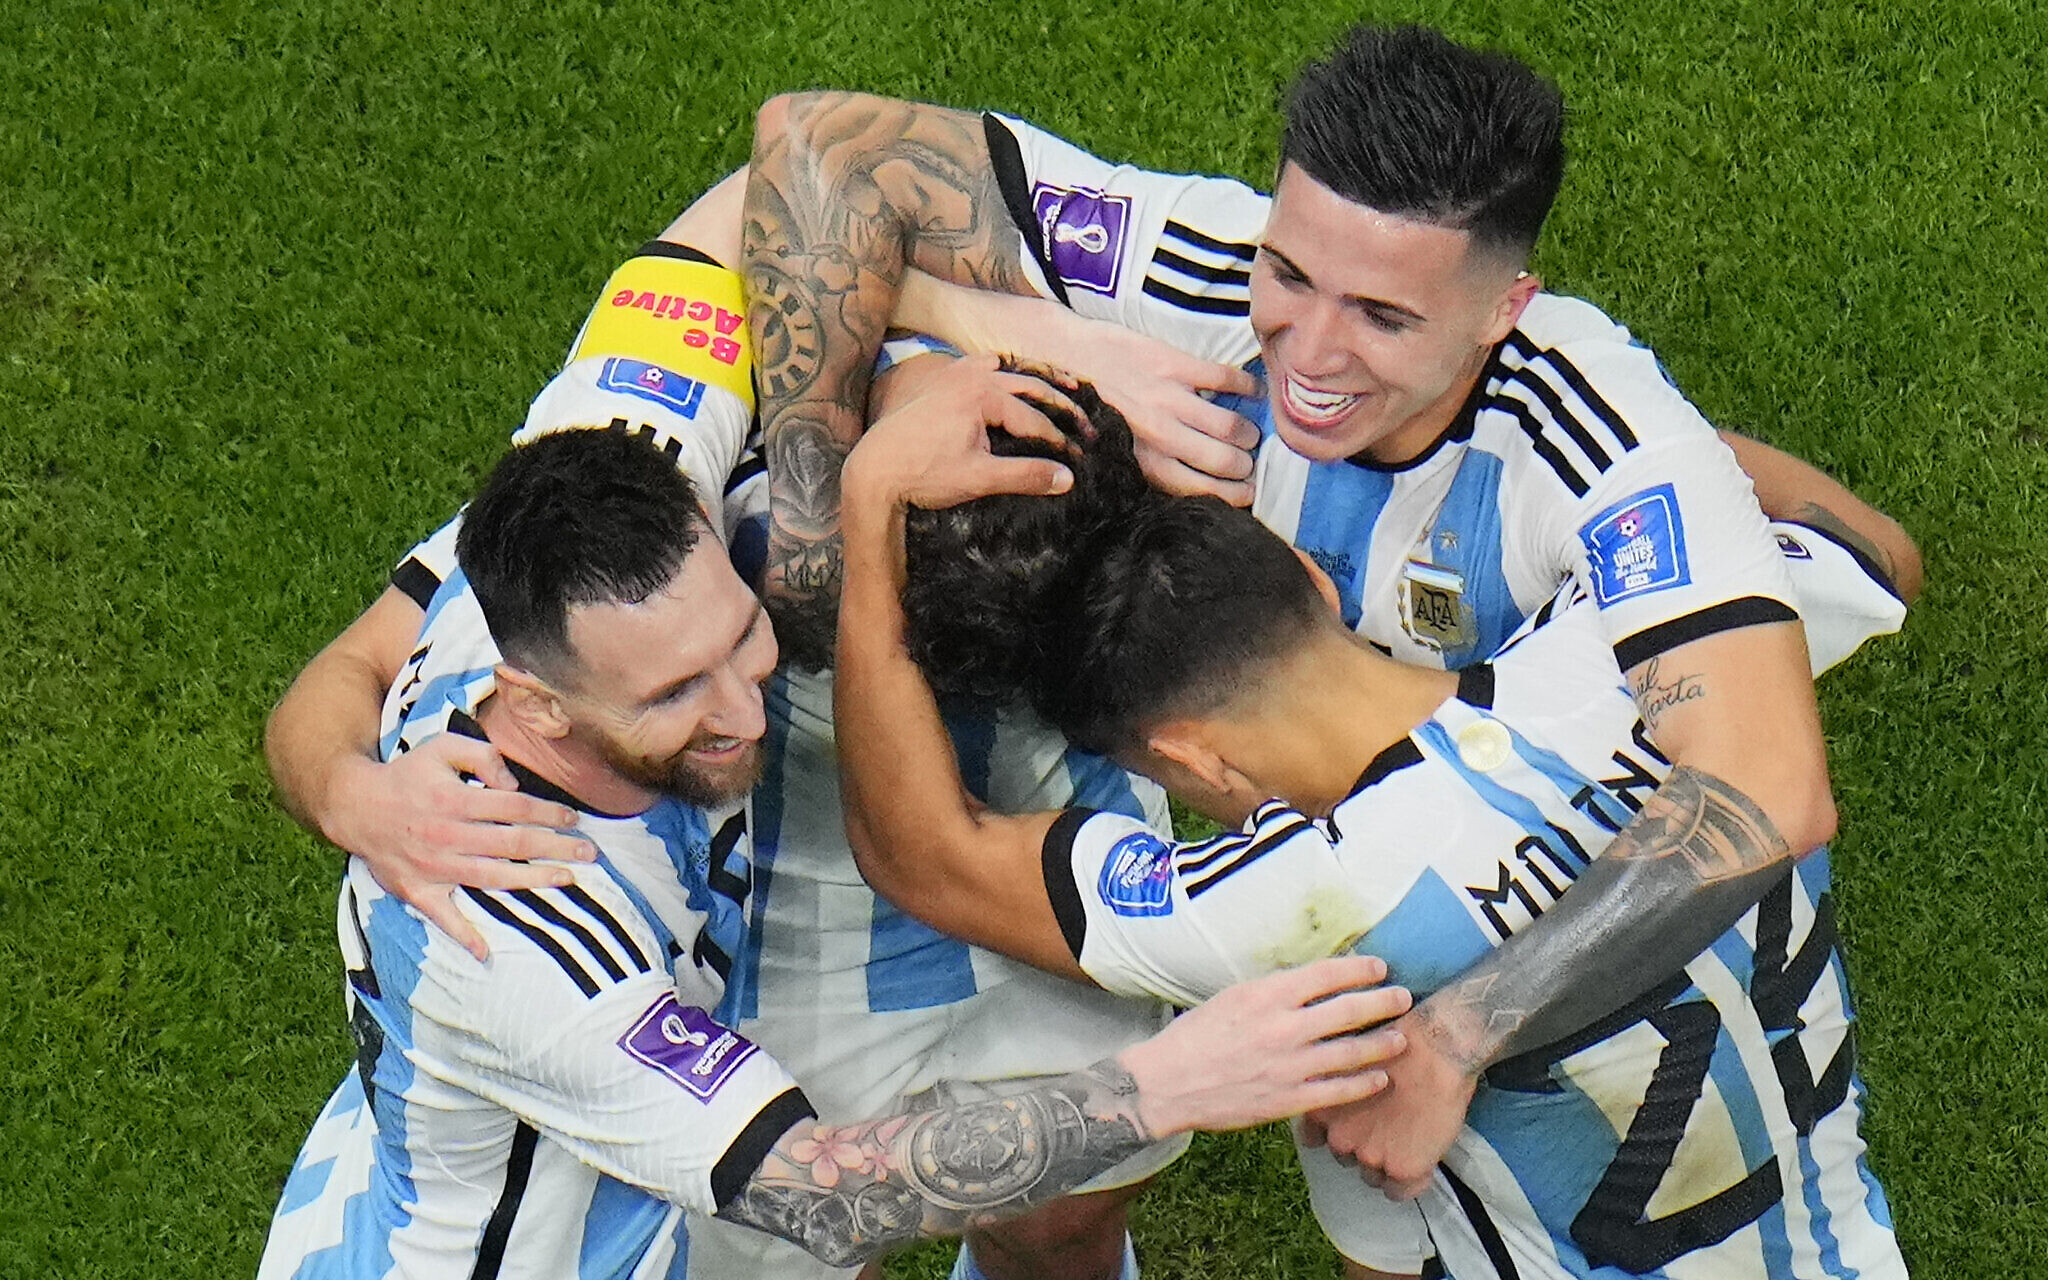 Argentina punches ticket to World Cup final with 3-0 win over Croatia The Times of Israel